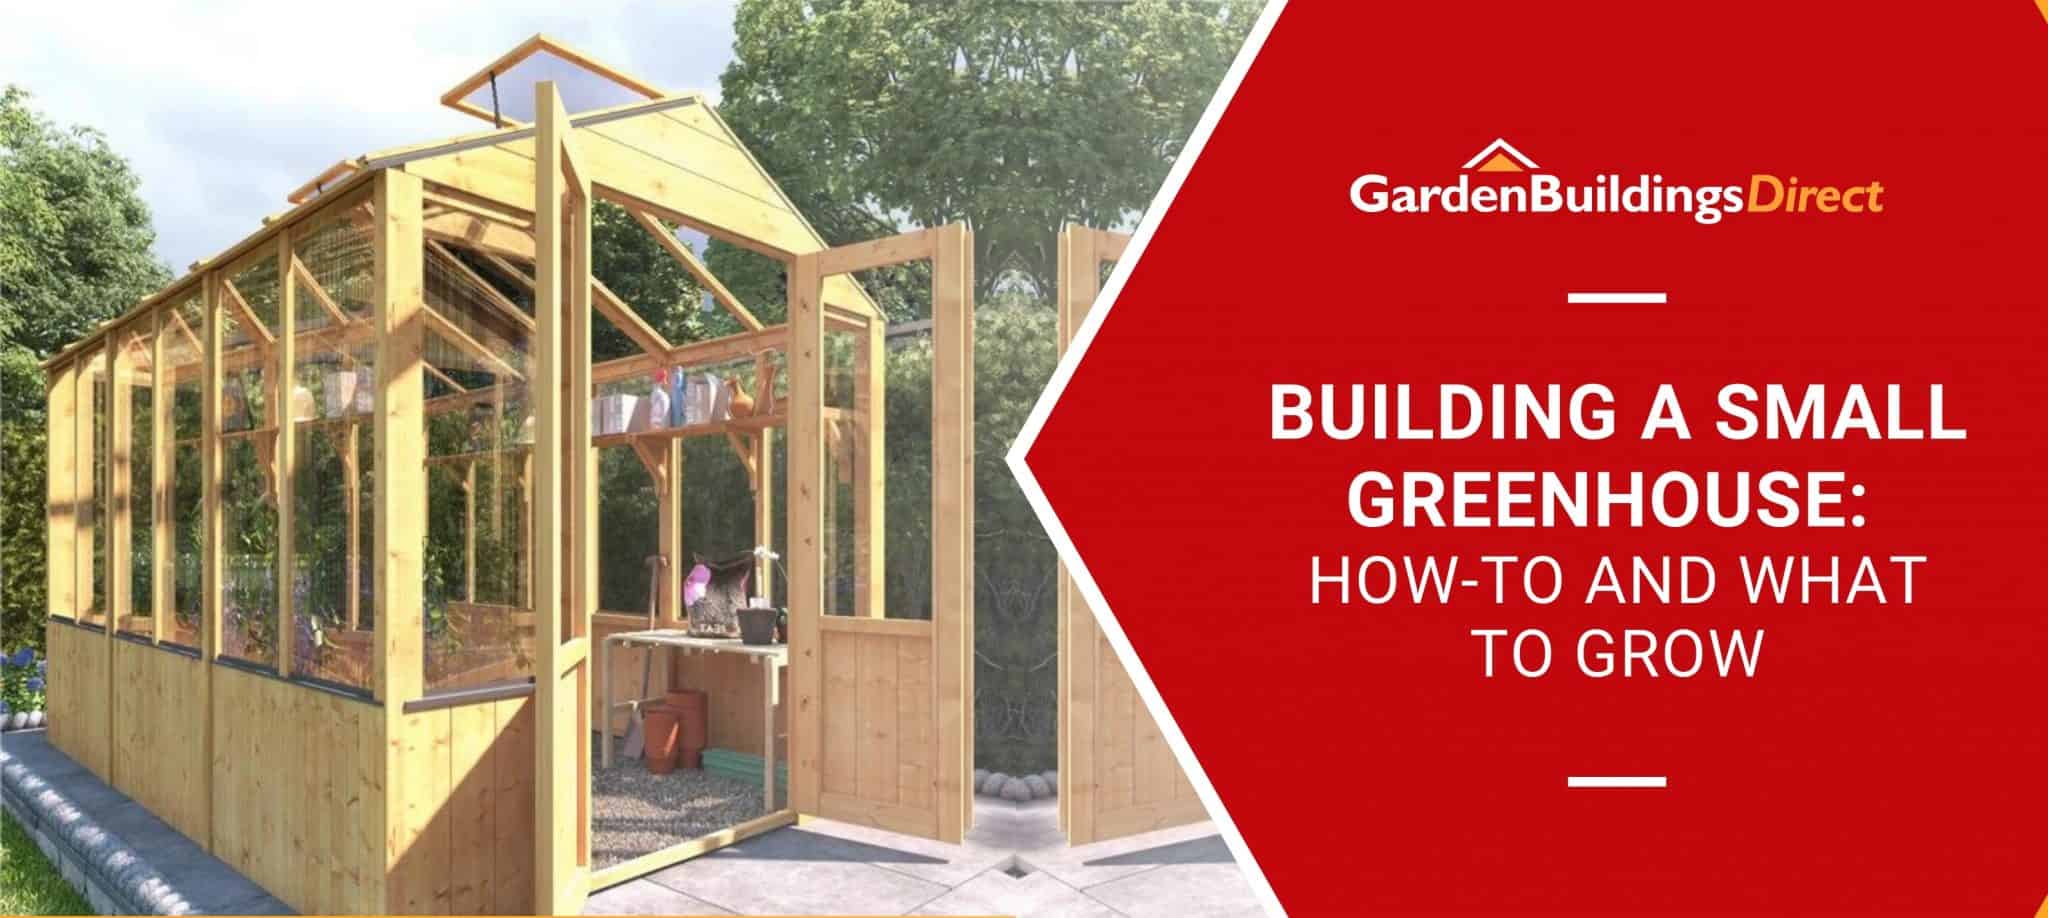 BillyOh 4000 Lincoln Wooden Greenhouse with 'Building a Small Greenhouse' banner on a red arrow with Garden Buildings Direct logo